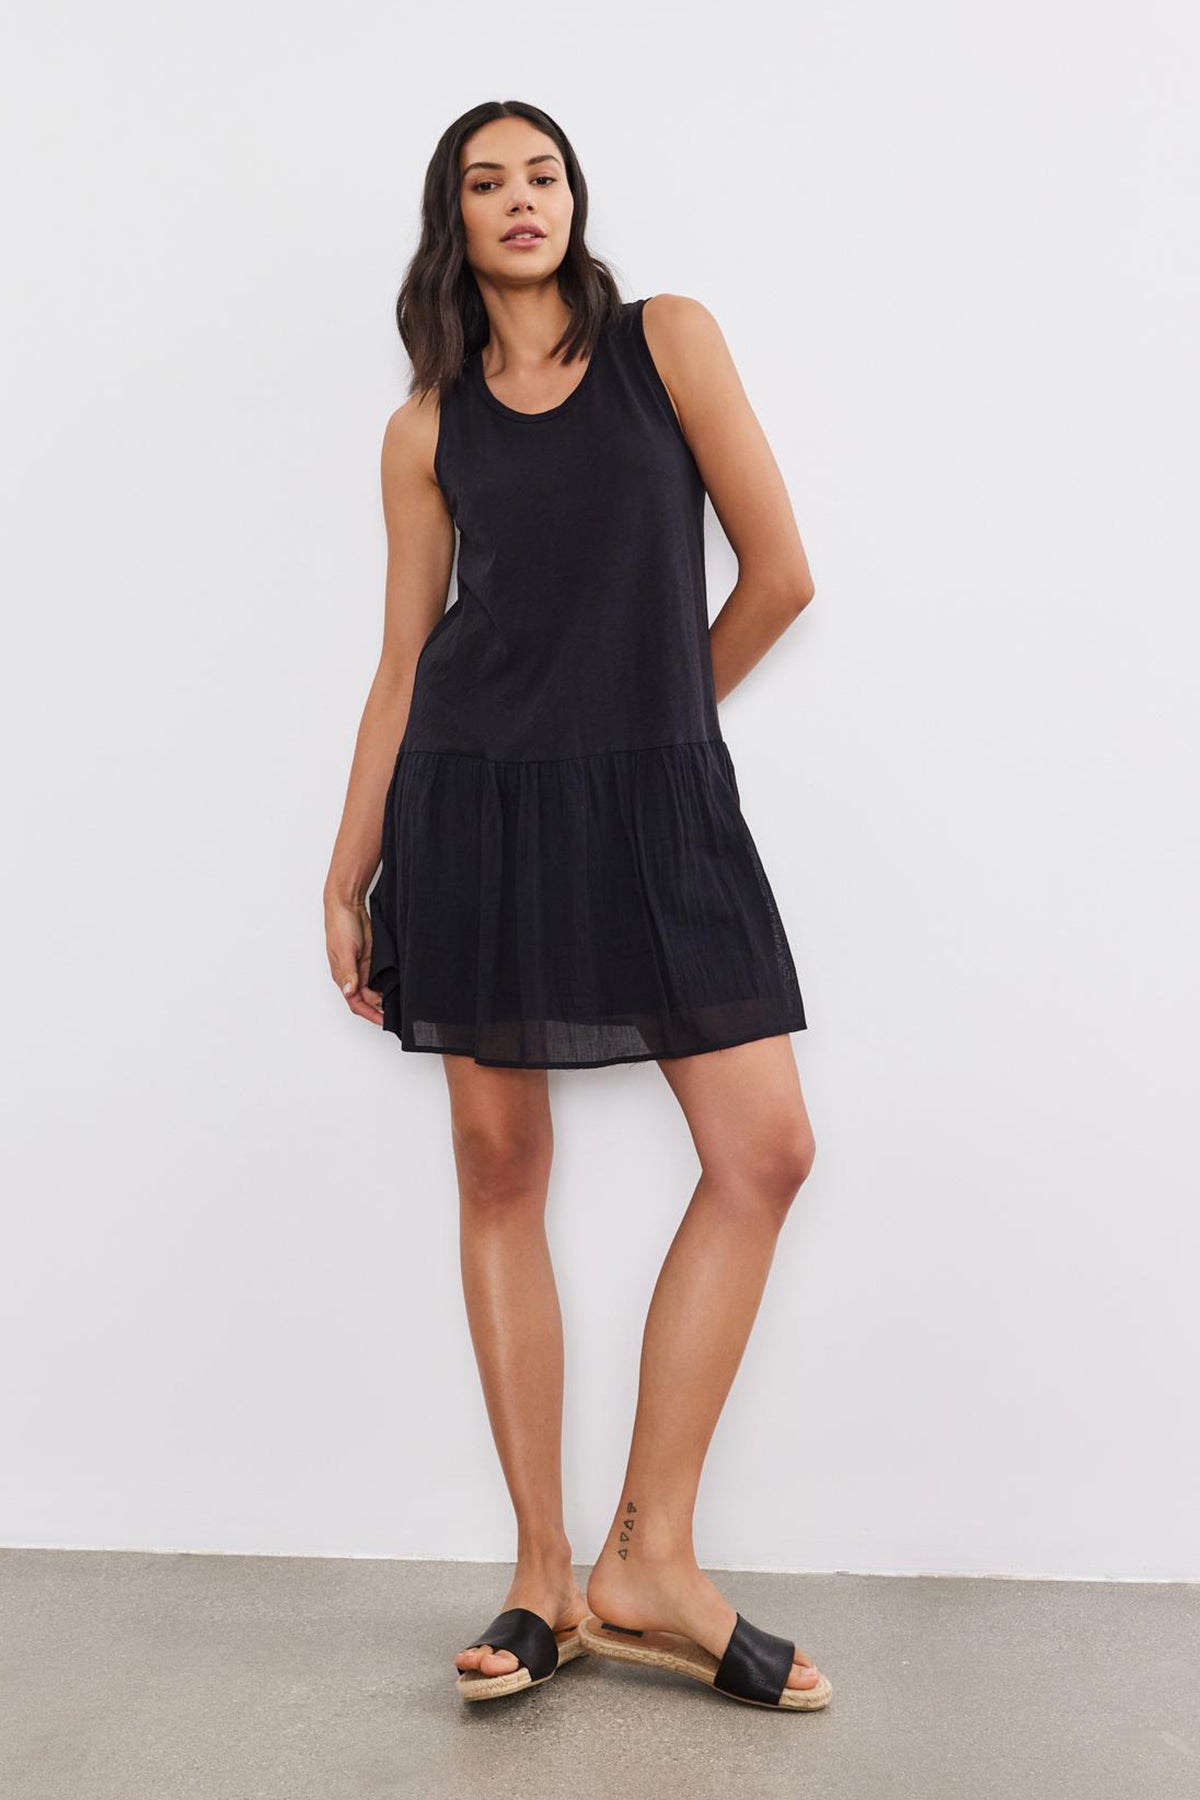 A woman with dark hair is wearing a sleeveless, black, drop-waist MINA DRESS by Velvet by Graham & Spencer featuring a tiered skirt and black slide sandals, standing against a plain white background. She has a relaxed posture with one leg slightly bent.-37054552473793